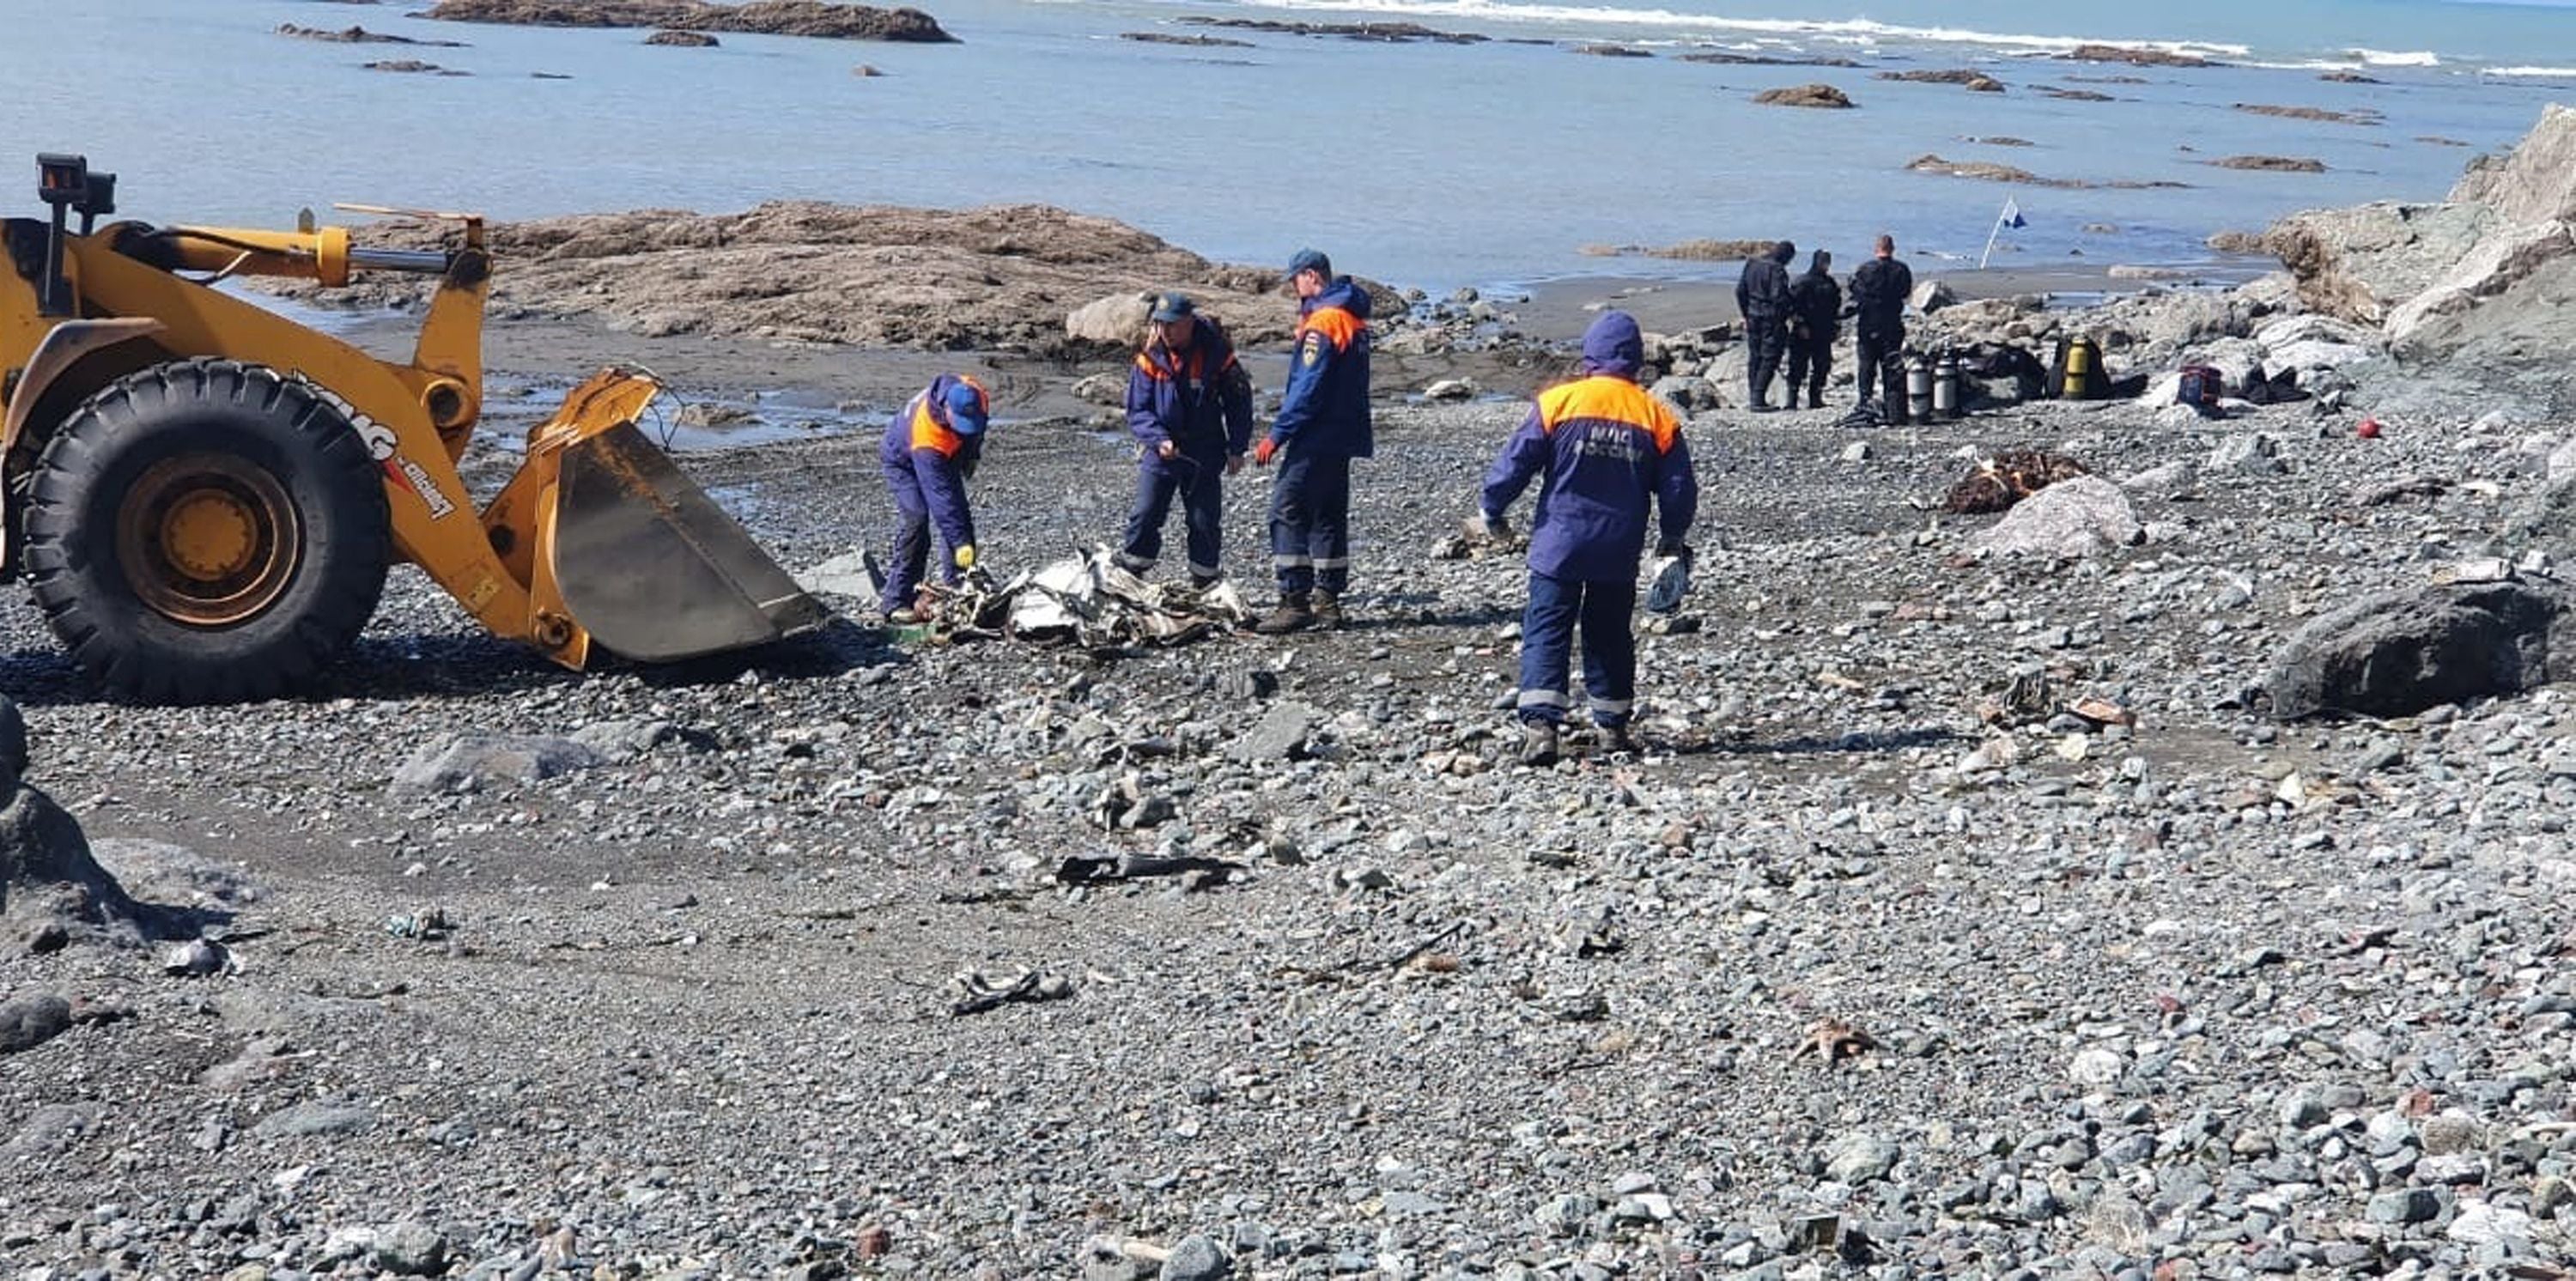 Emergency Situations Ministry workers taking part in the rescue operation at the spot where a Mi-8 helicopter crash-landed into Kuril Lake in the Kronotsky nature reserve on the Kamchatka Peninsula, outside Petropavlovsk-Kamchatsky